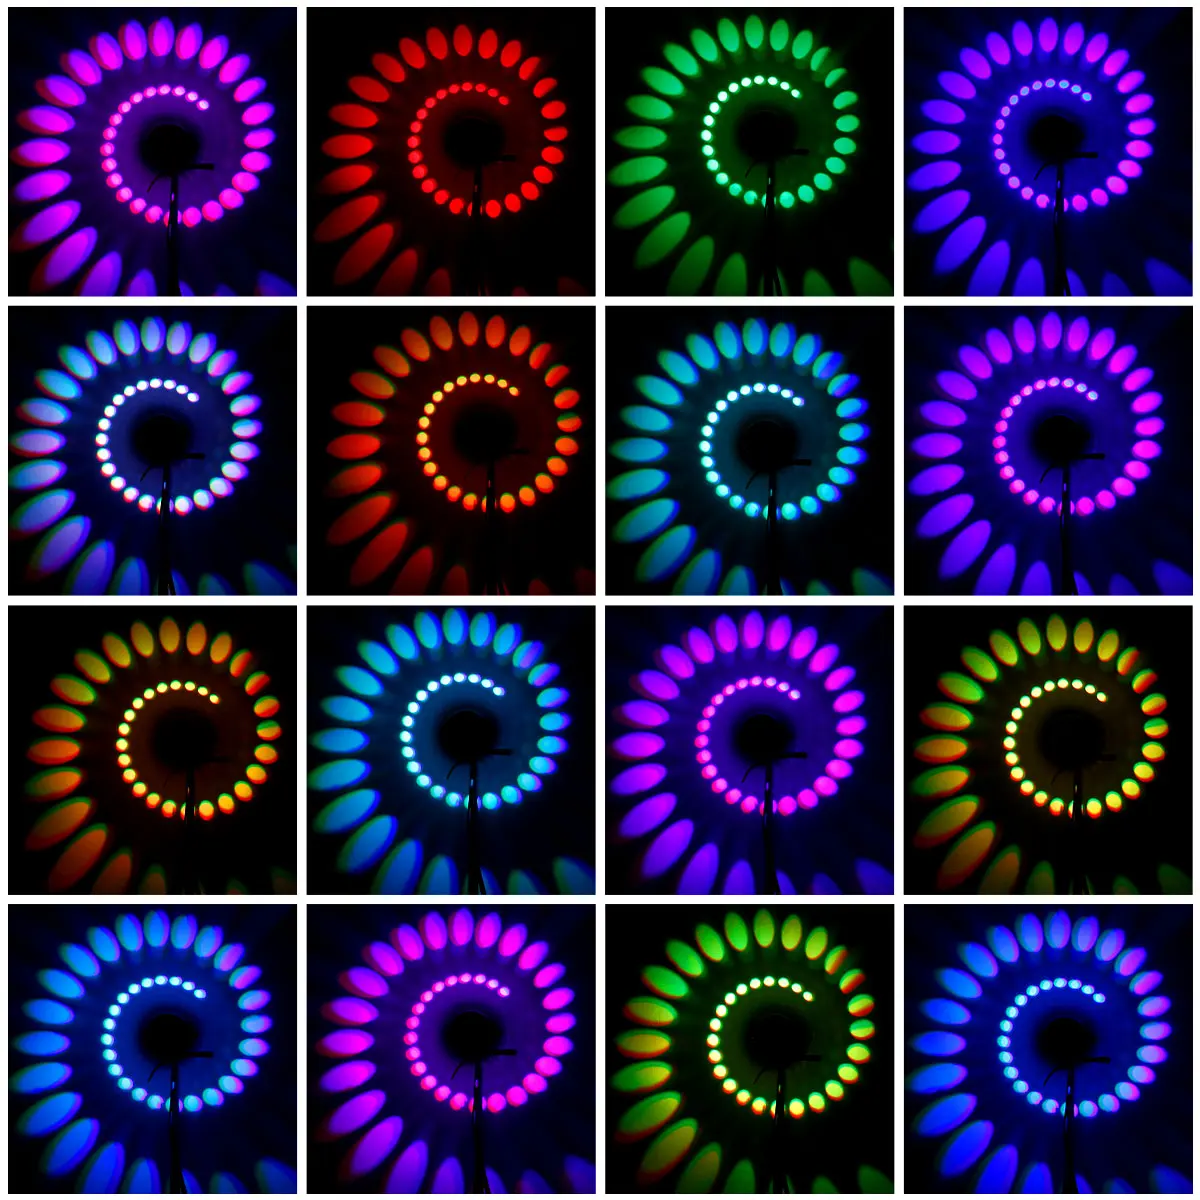 RGB Spiral Hole Wall Light 16 Colors With RGB Remote Control LED Wall Lamp Wandlamp For Party Bar Hall KTV Home Decoration bedside wall lamps